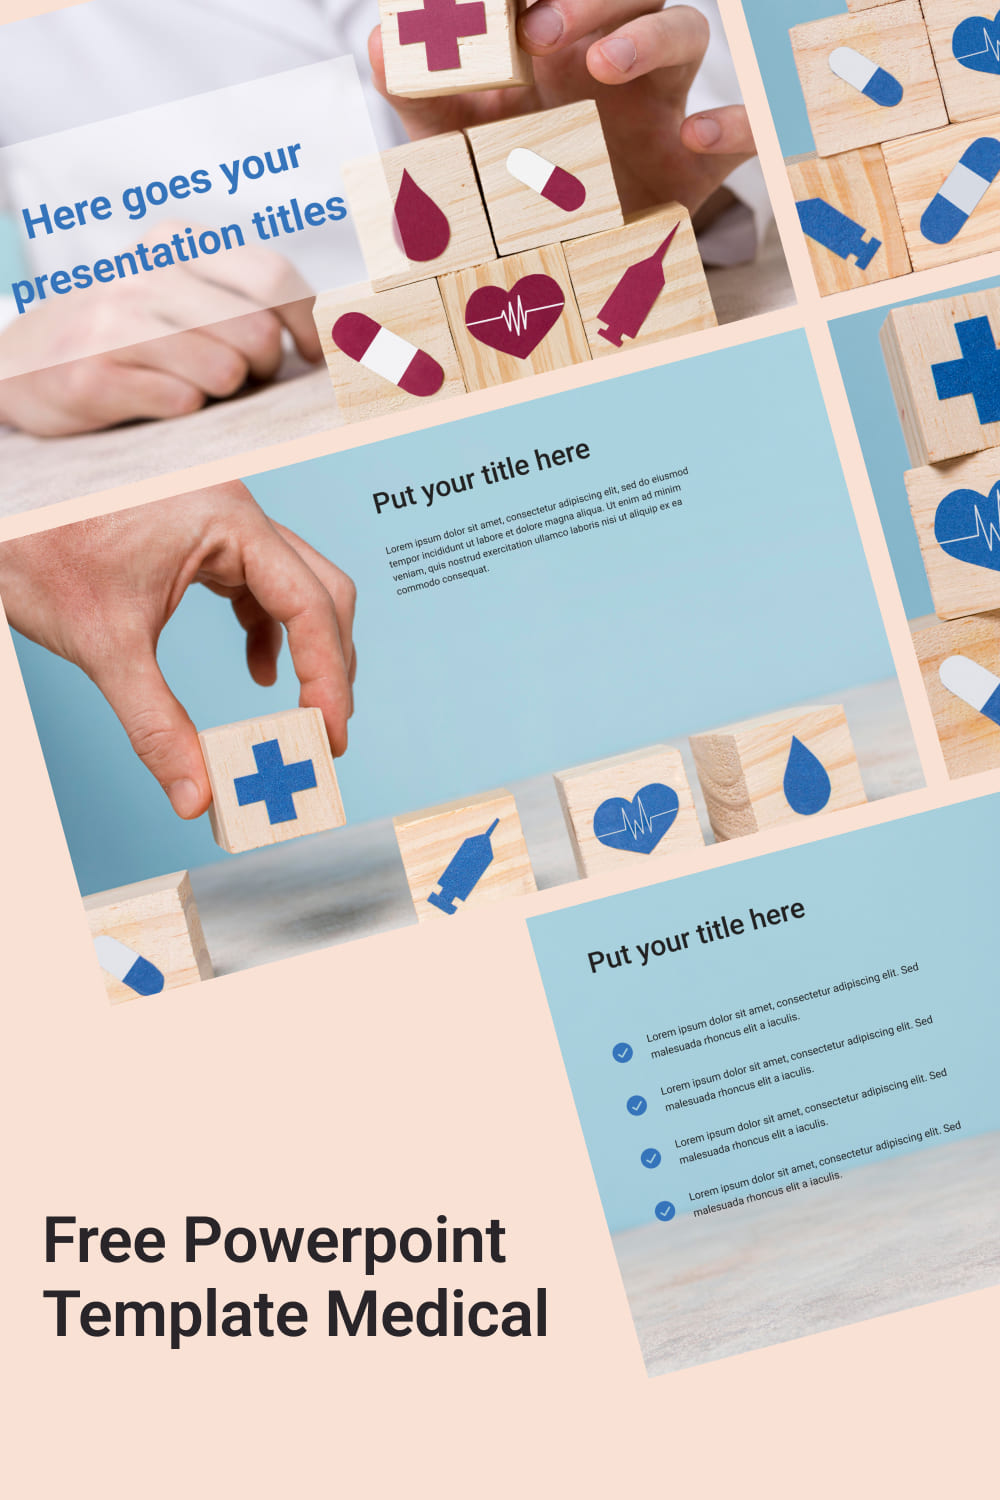 Pint Free Powerpoint Template Medical.